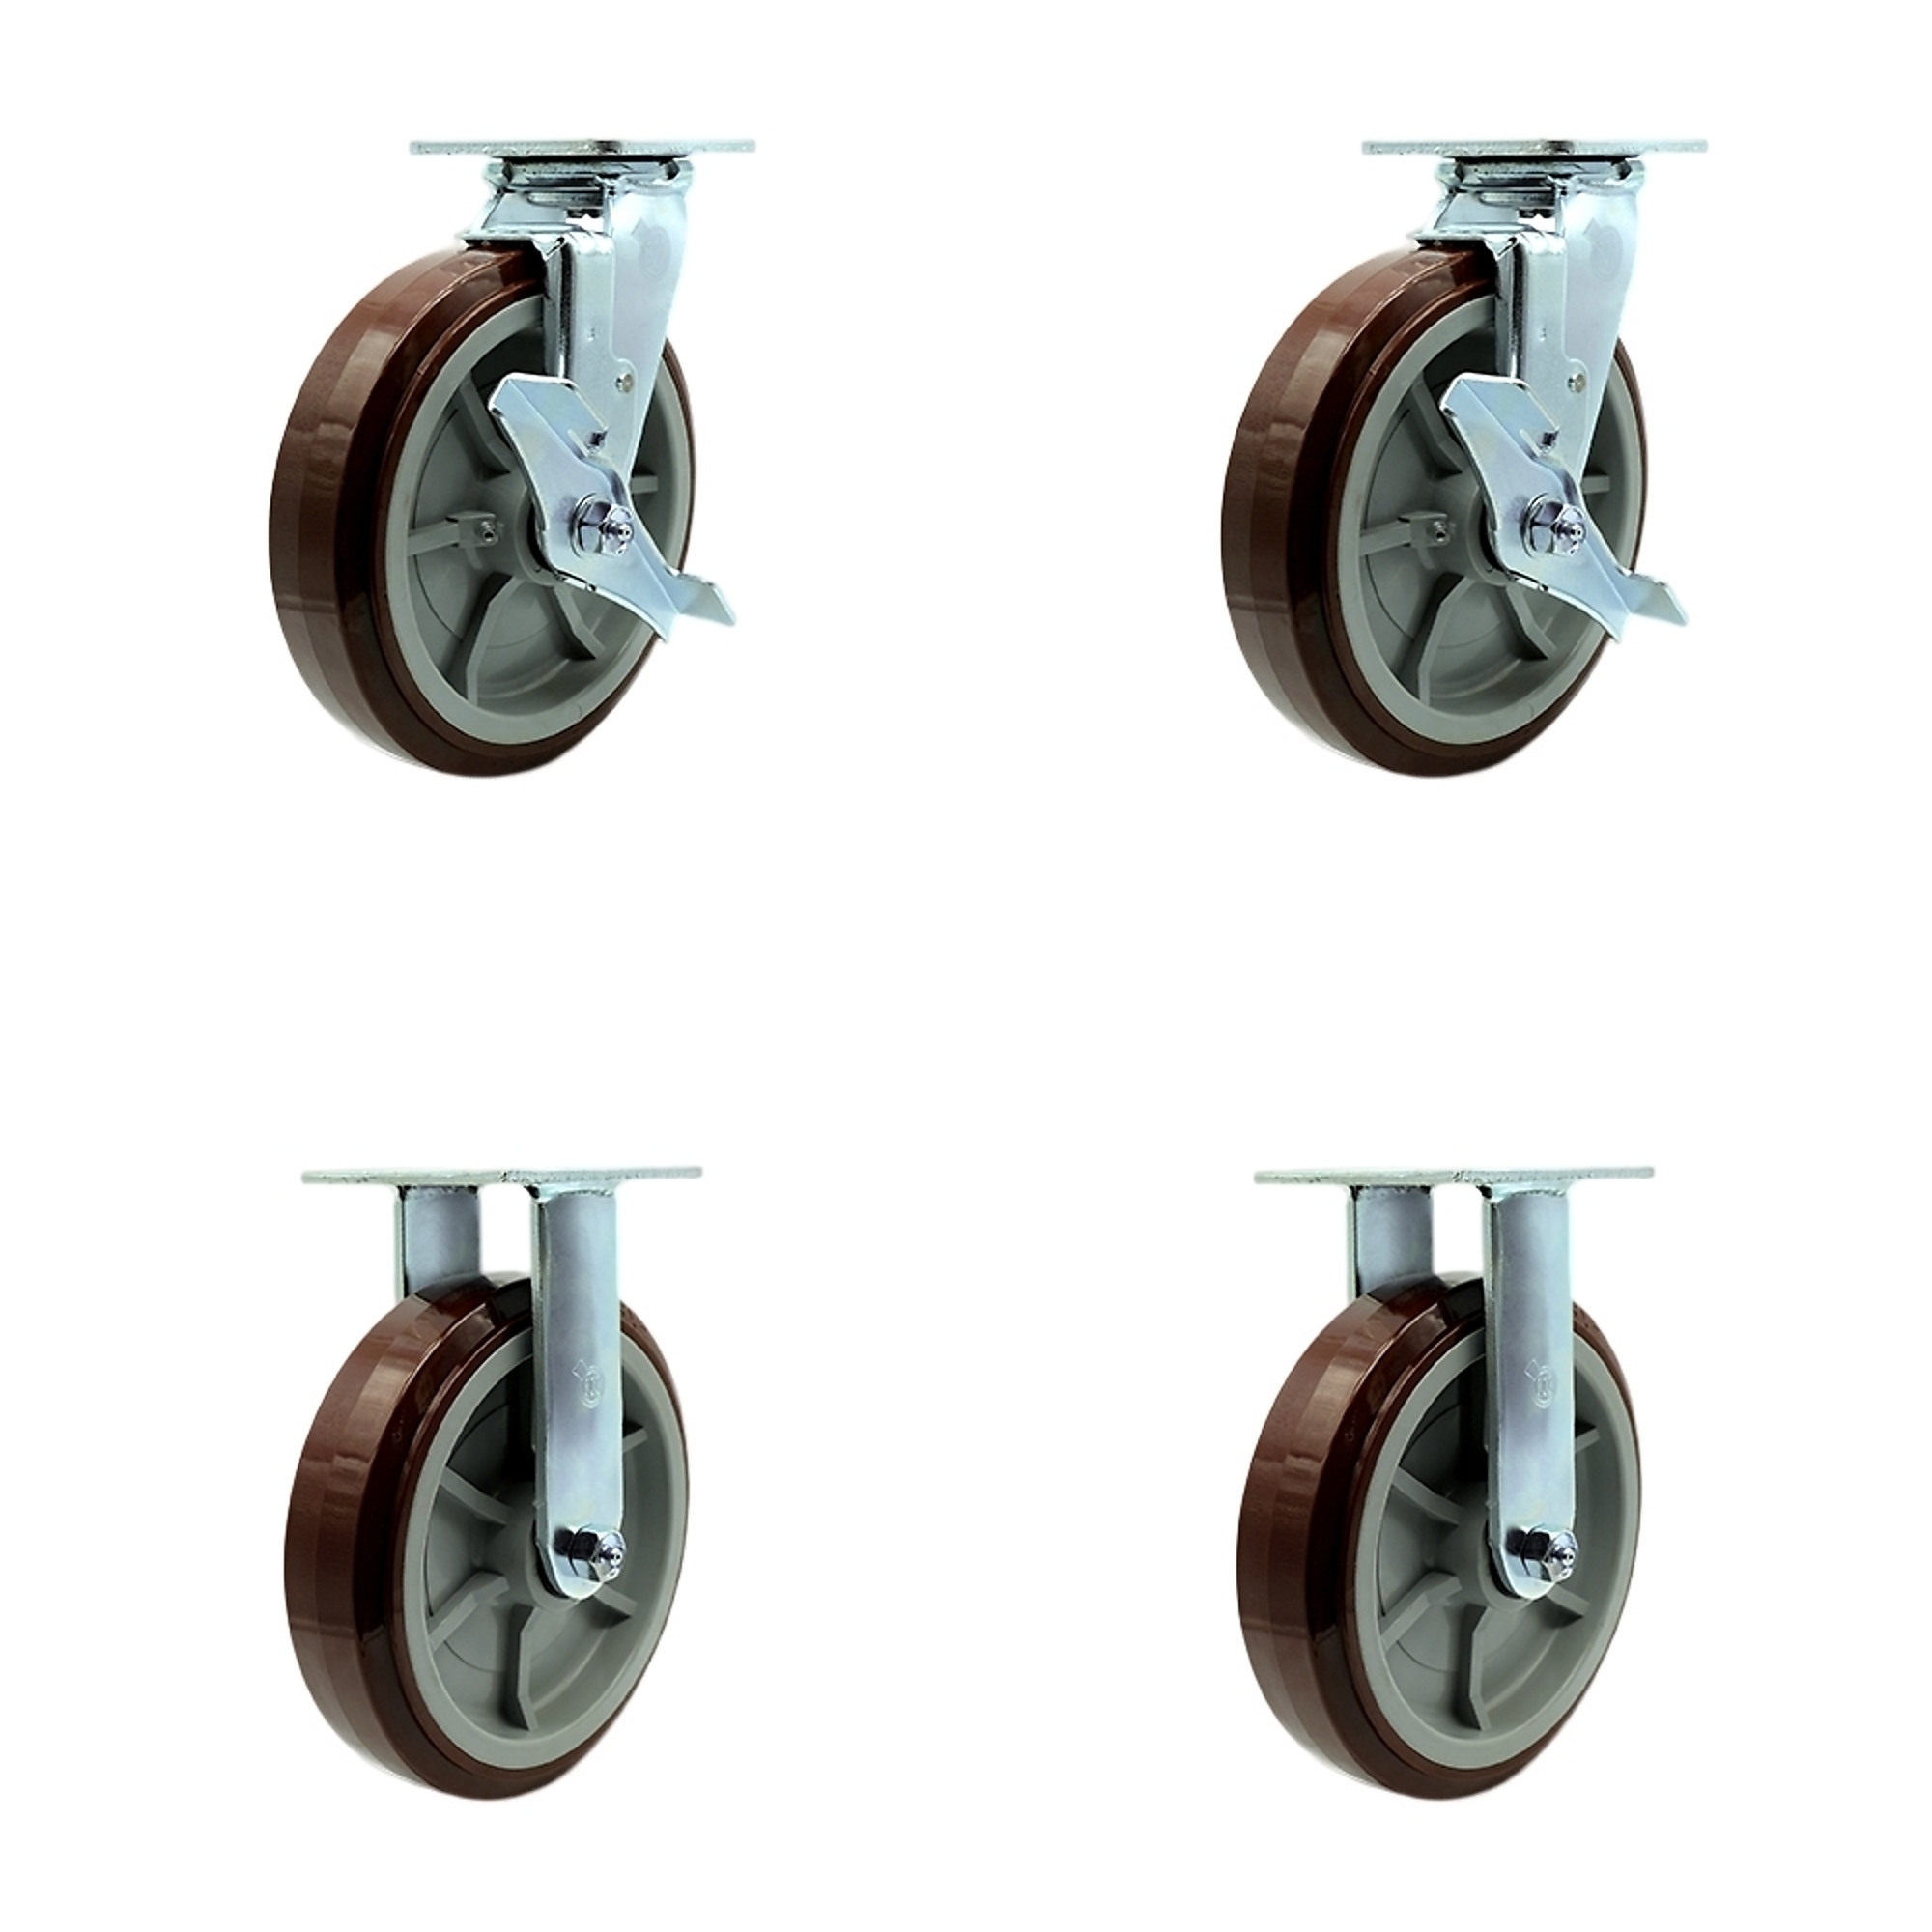 8Inch x 2Inch Plate Casters, Wheel Diameter 8 in, Caster Type Swivel, Package (qty.) 4, Model - Service Caster GRE-SCC-30CS820-PPUR-TLB-2-R820-2